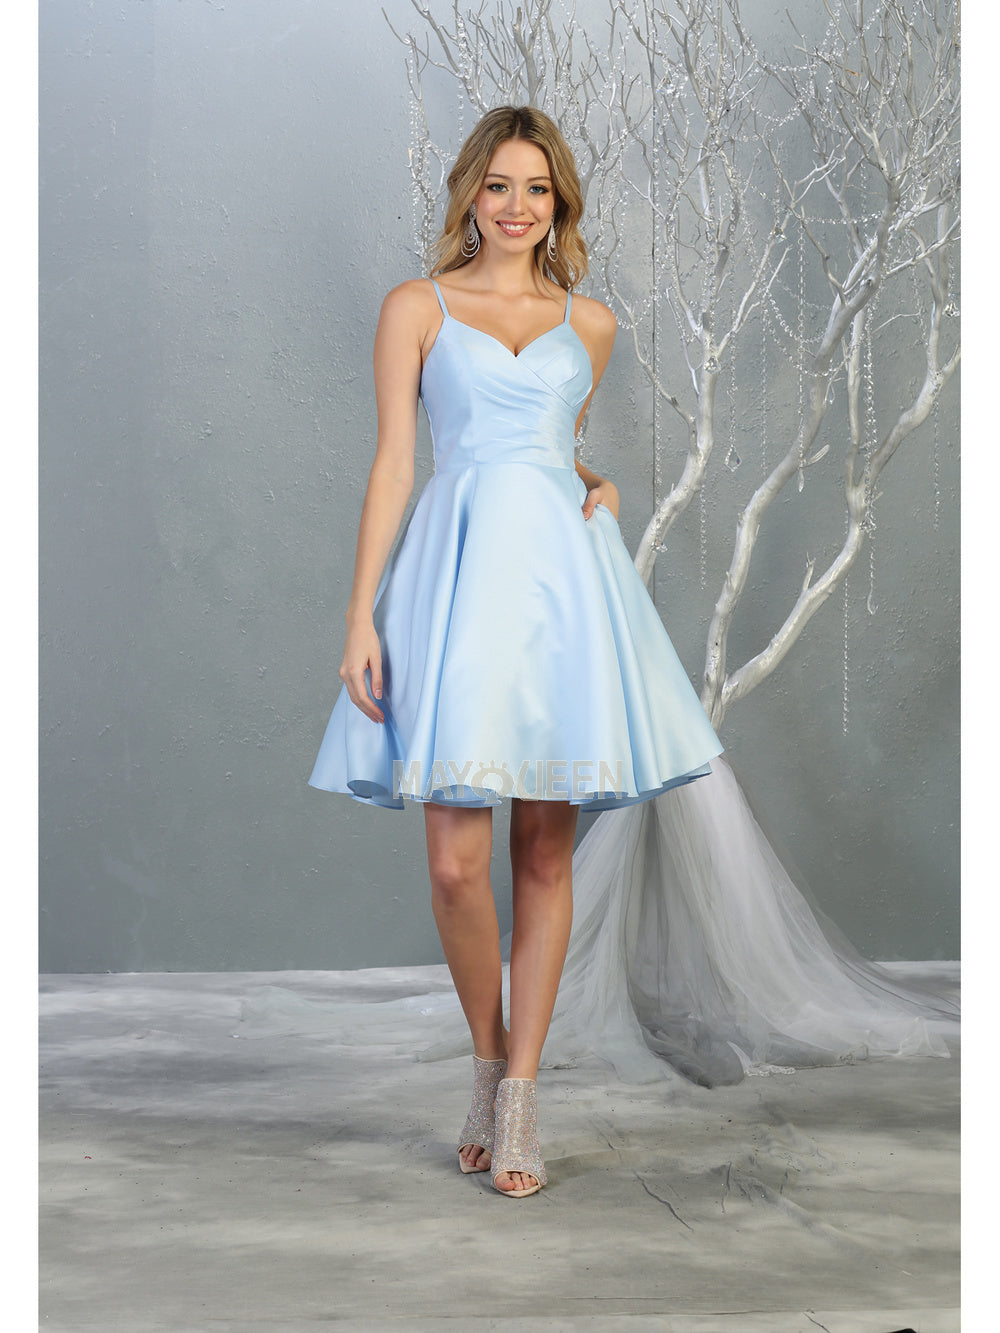 MQ 1654 - Tank Style Satin A-Line Homecoming Dress with Pockets Homecoming Mayqueen 2 BABY BLUE 